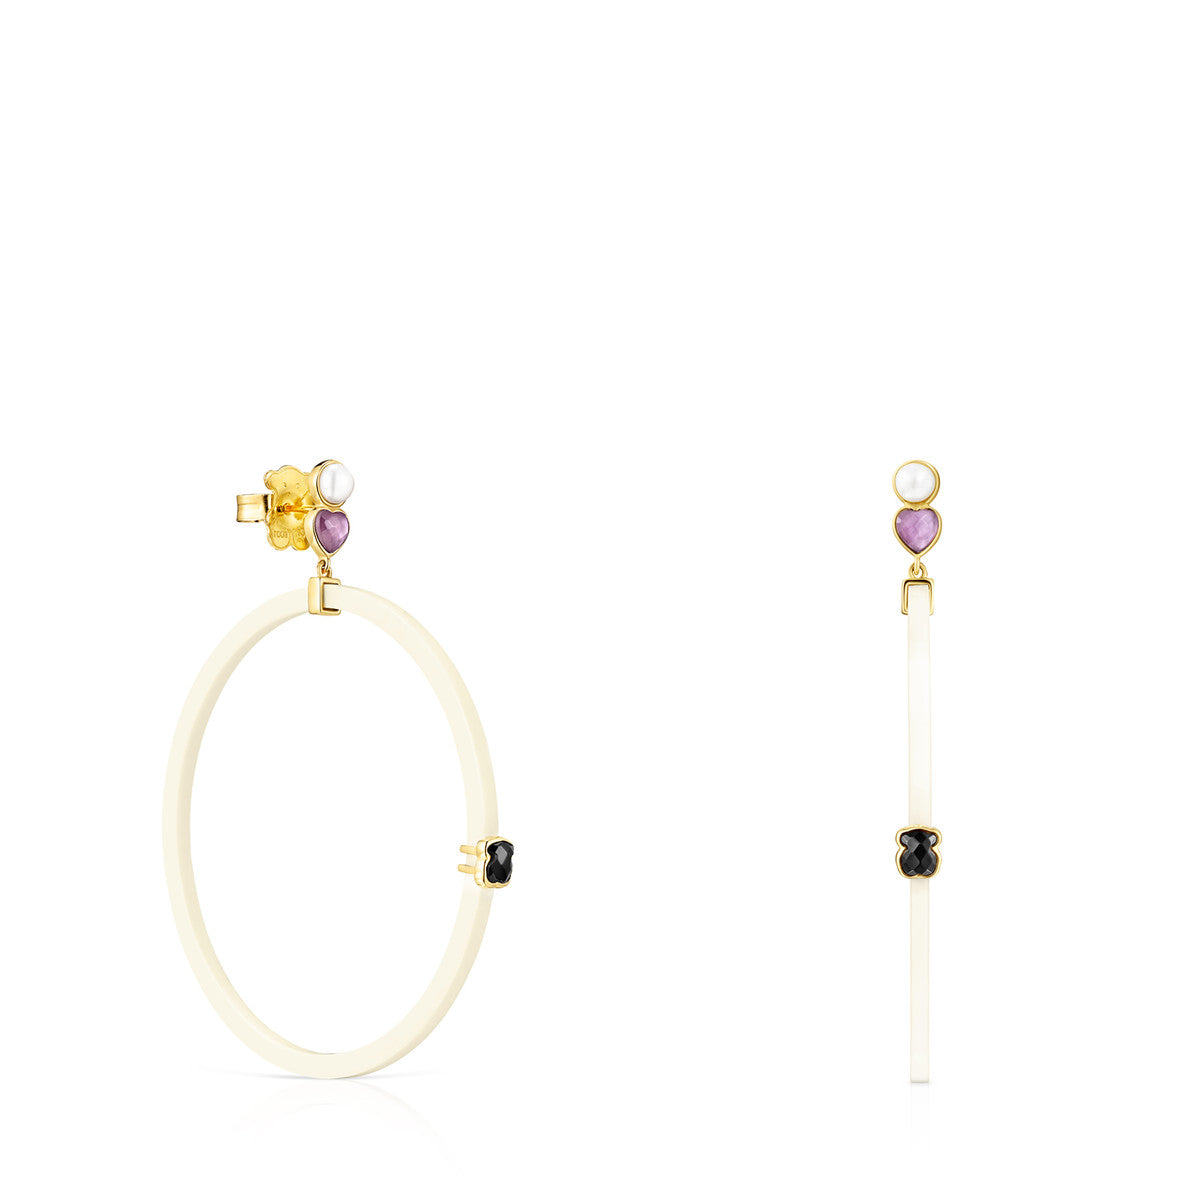 Tous Glory Earrings in Resin with Gold Vermeil and Gemstones 918593530 –